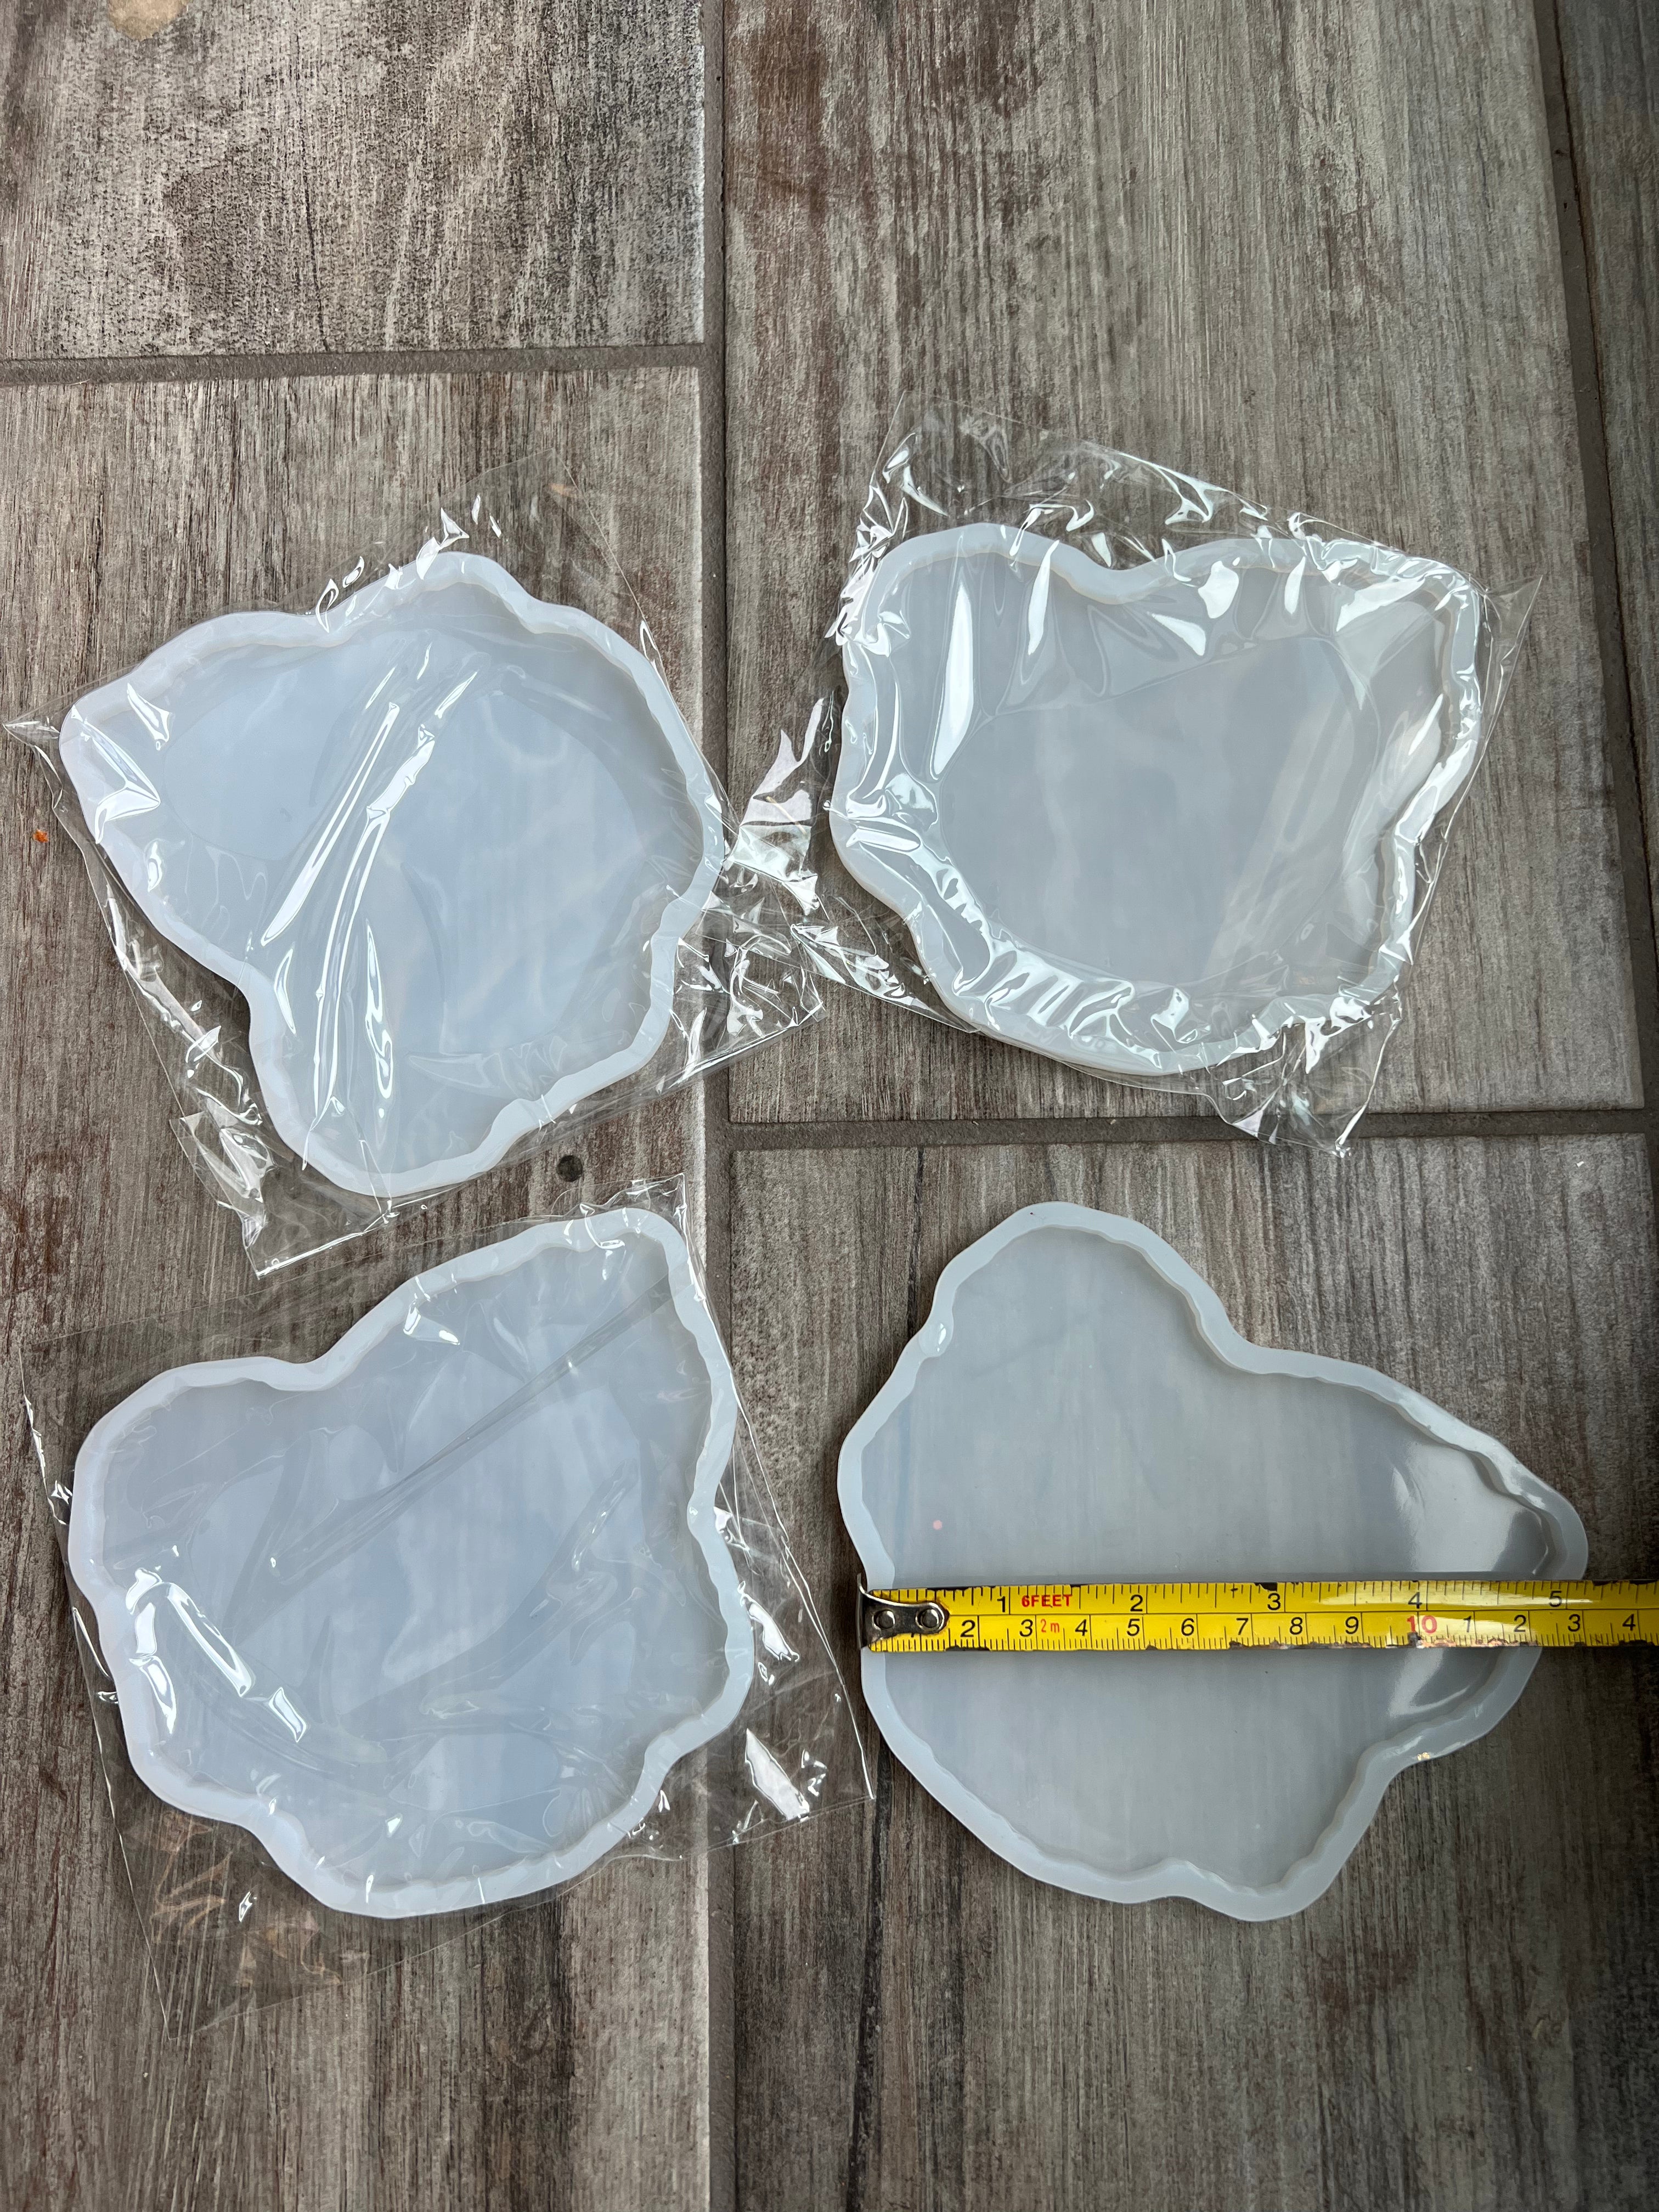 geode resin coaster mold set silicone 4 pc.